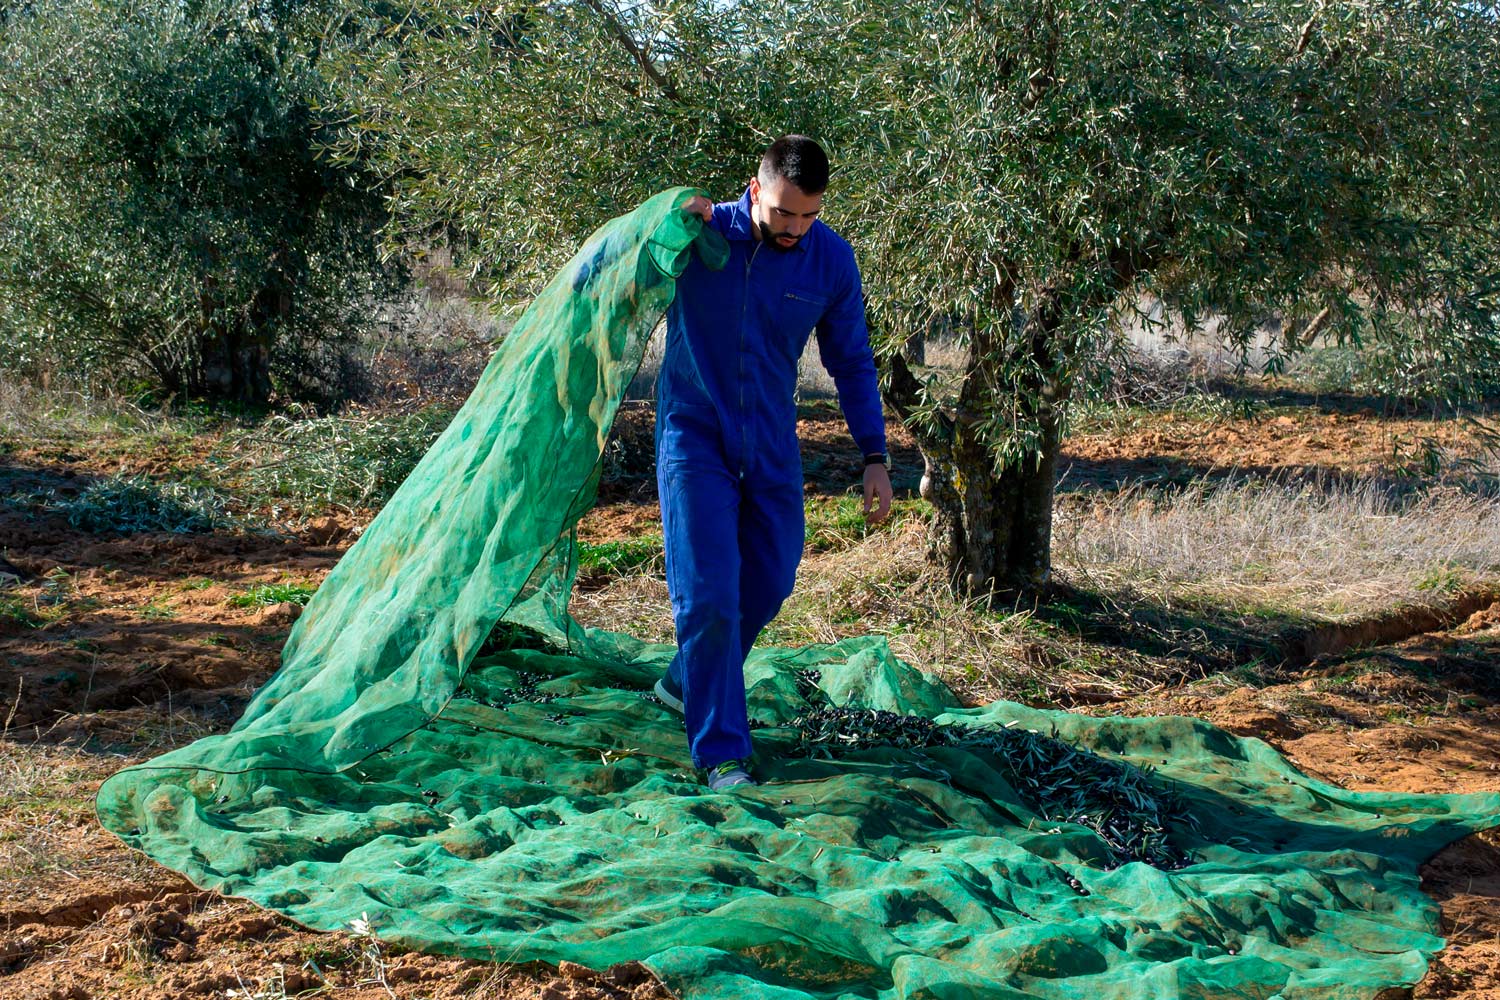 The olive grove and the challenge of plastics: towards sustainable management